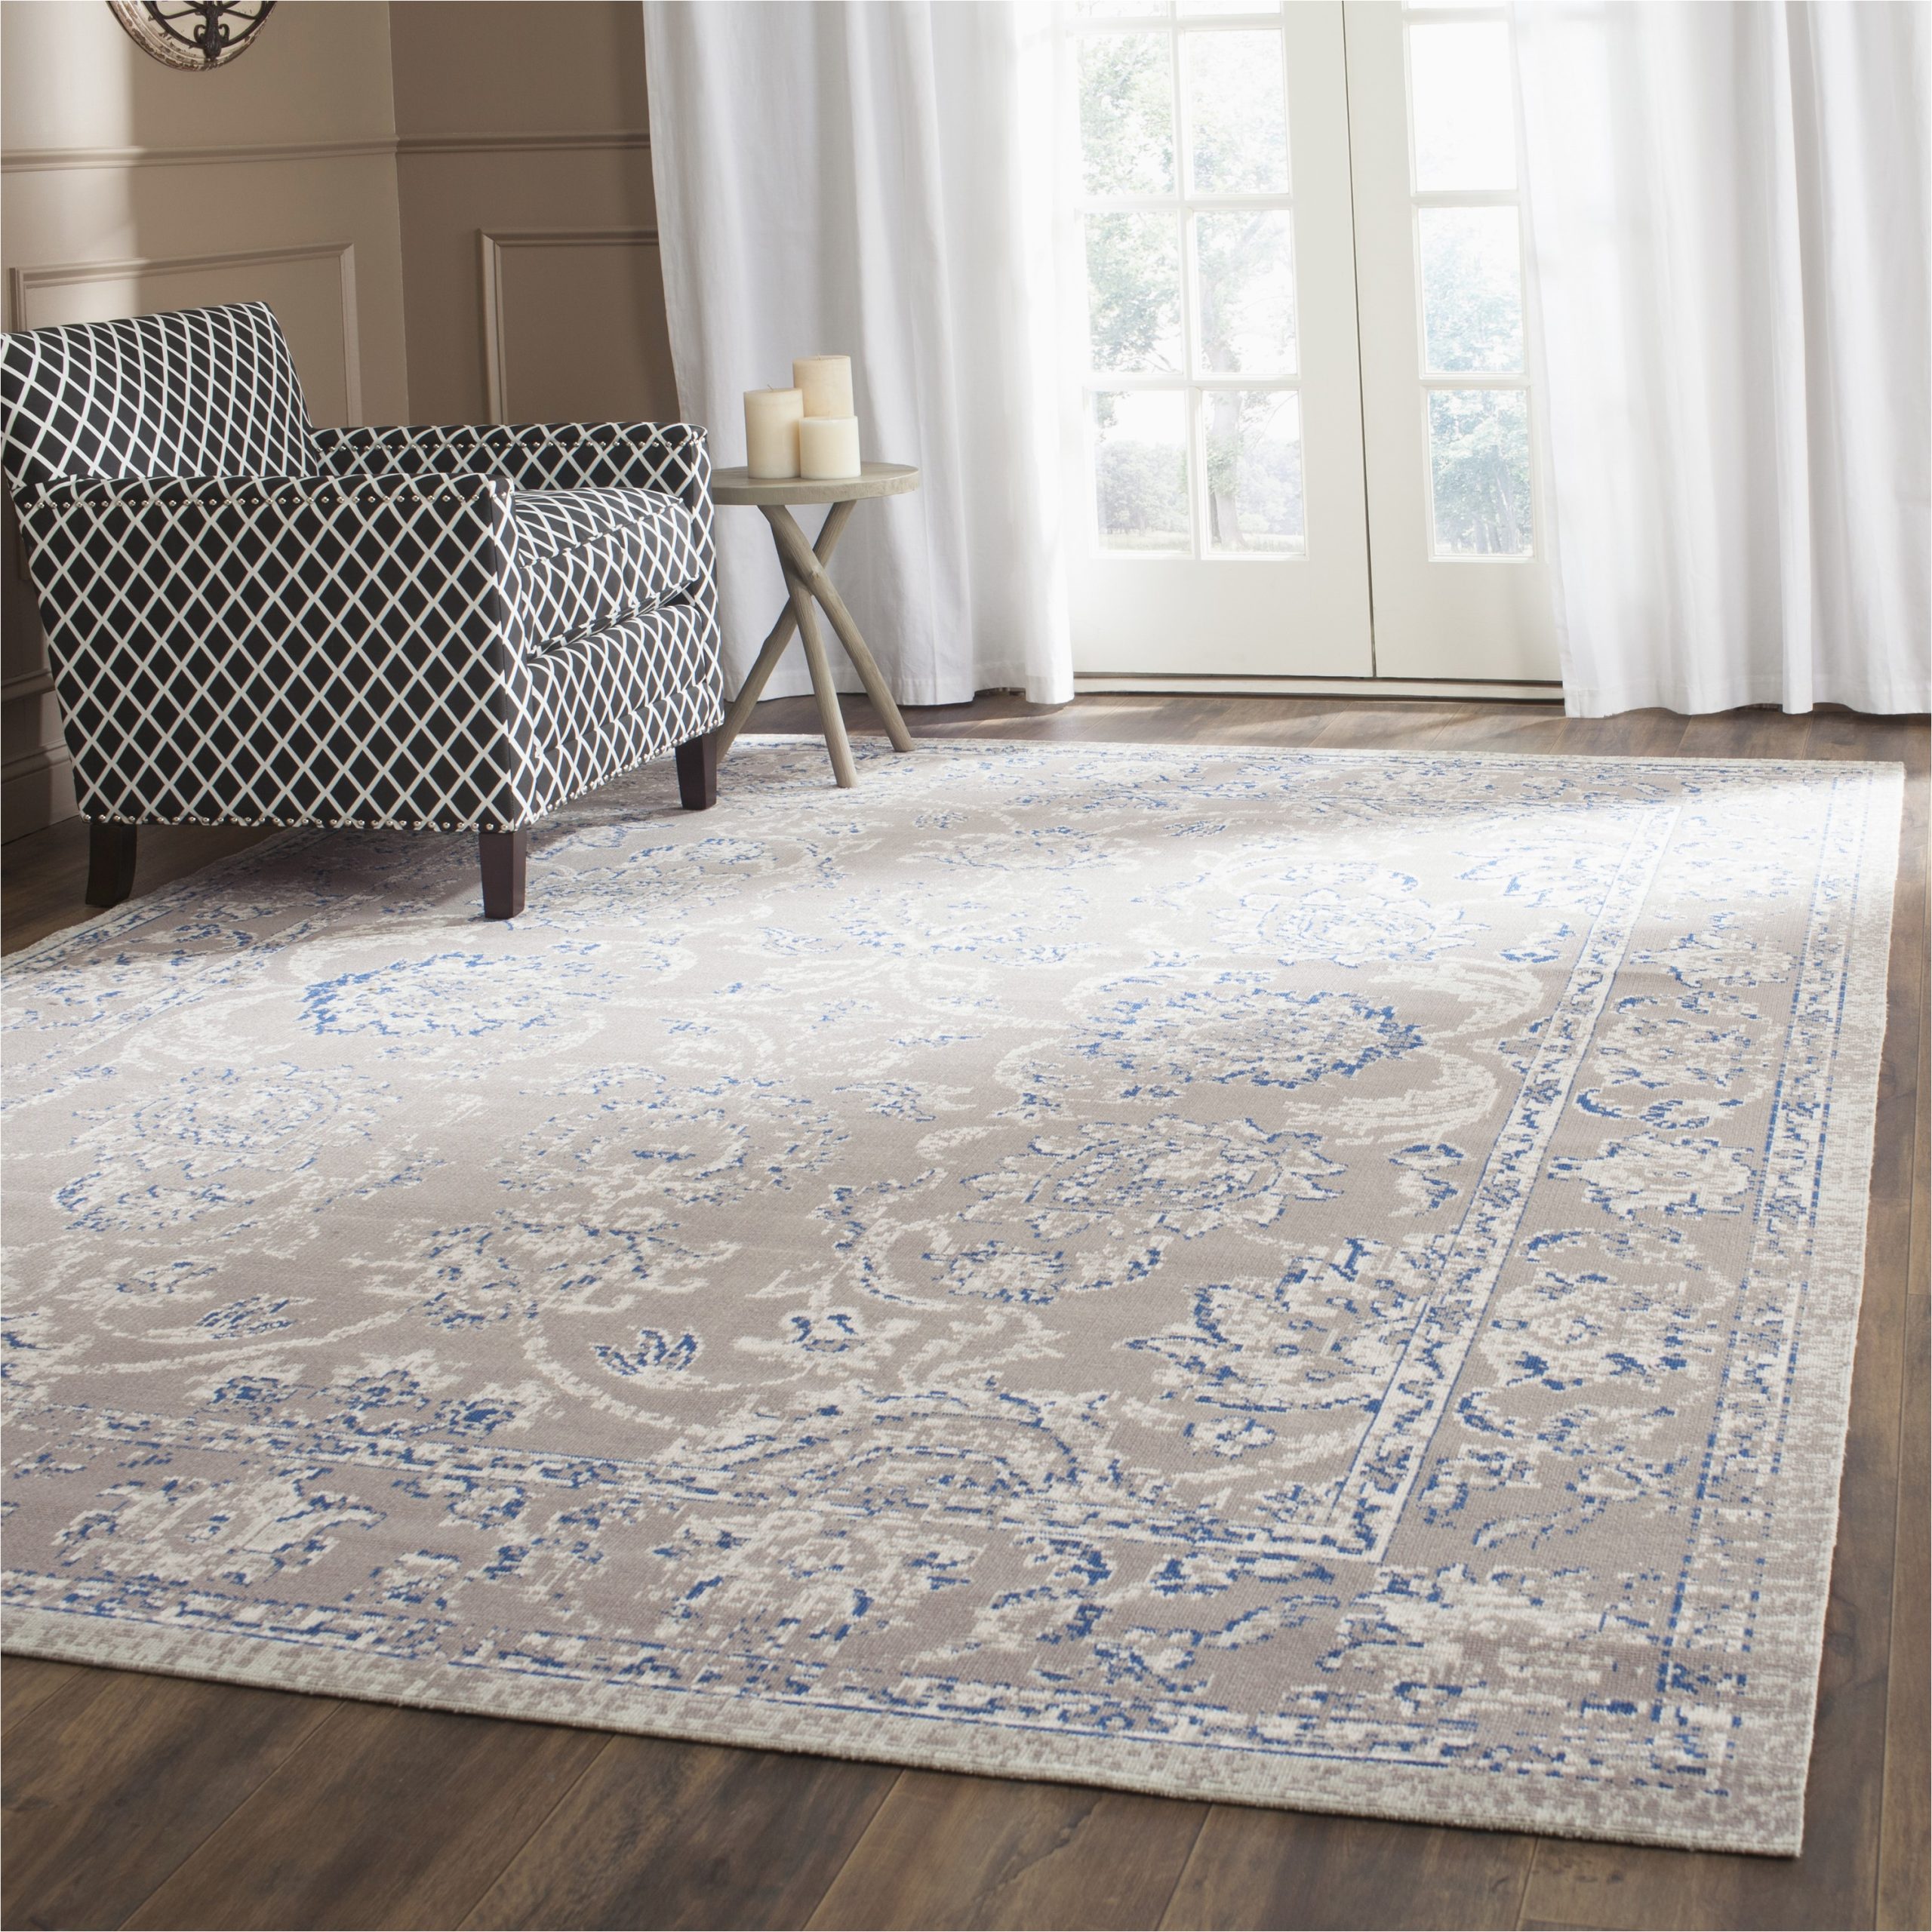 Blue and Taupe Rug Safavieh Patina Sinese 4 X 6 Taupe/blue Indoor Abstract Vintage …